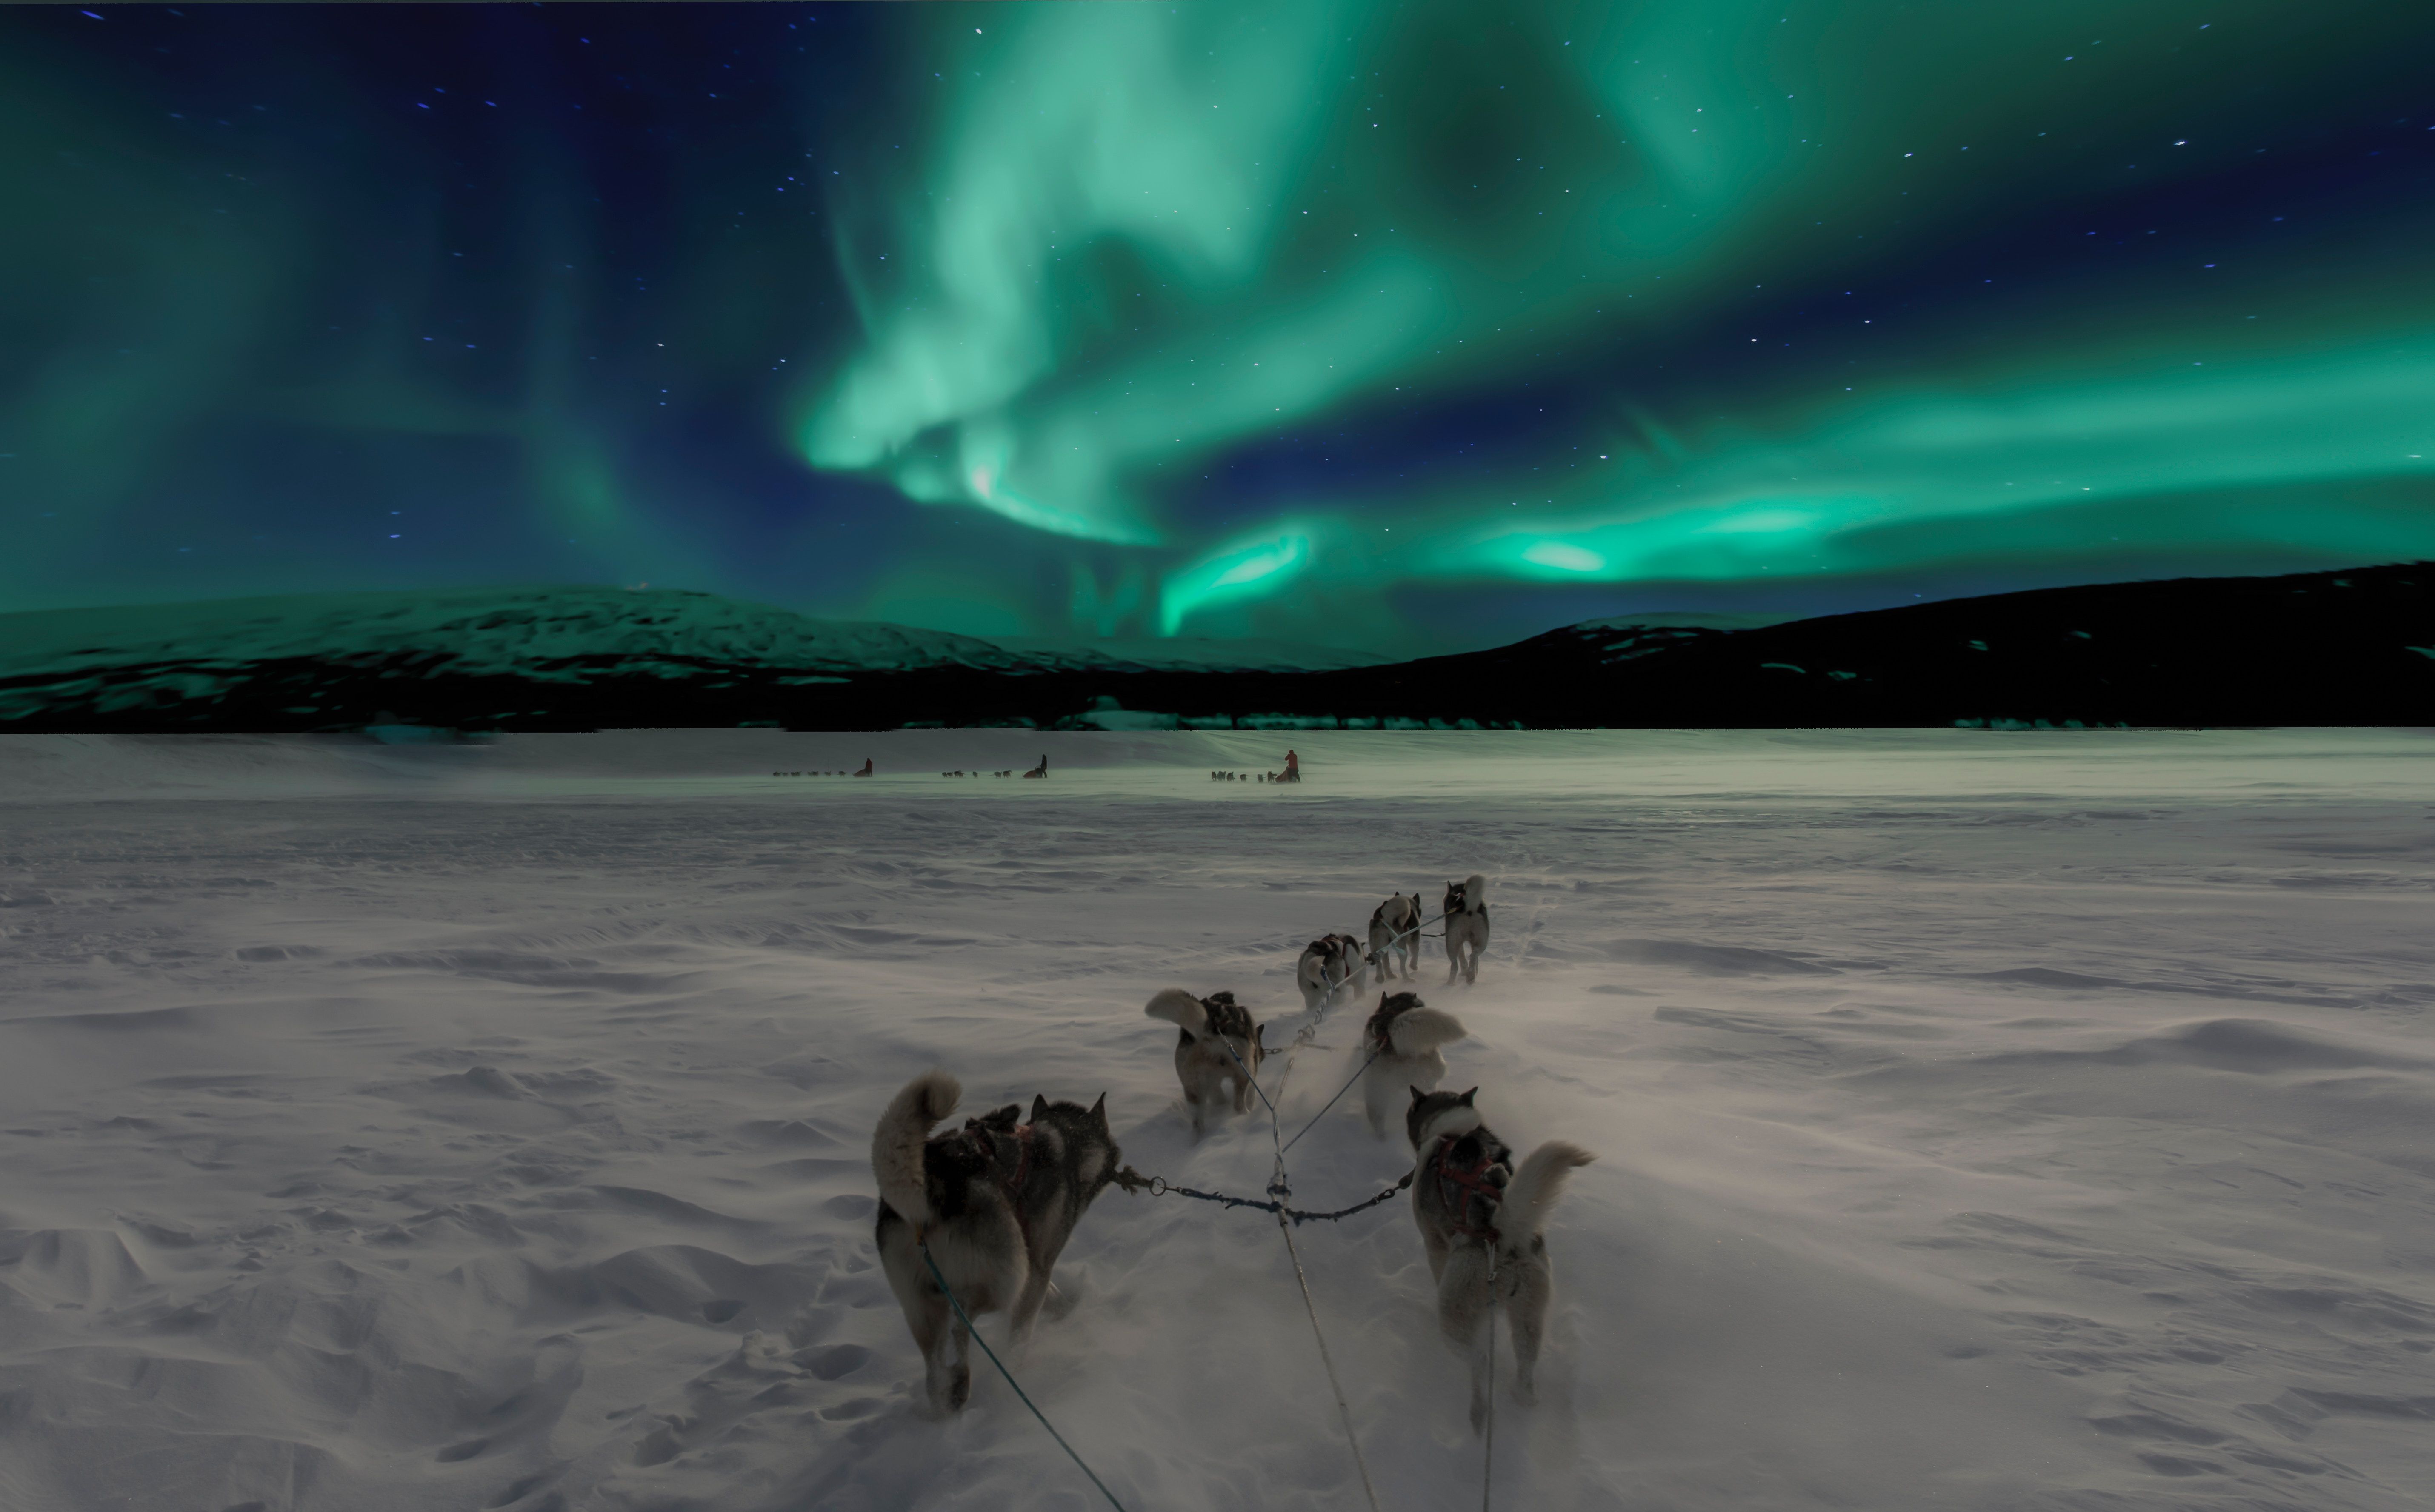 Sled Dogs Wallpaper Free Sled Dogs Background